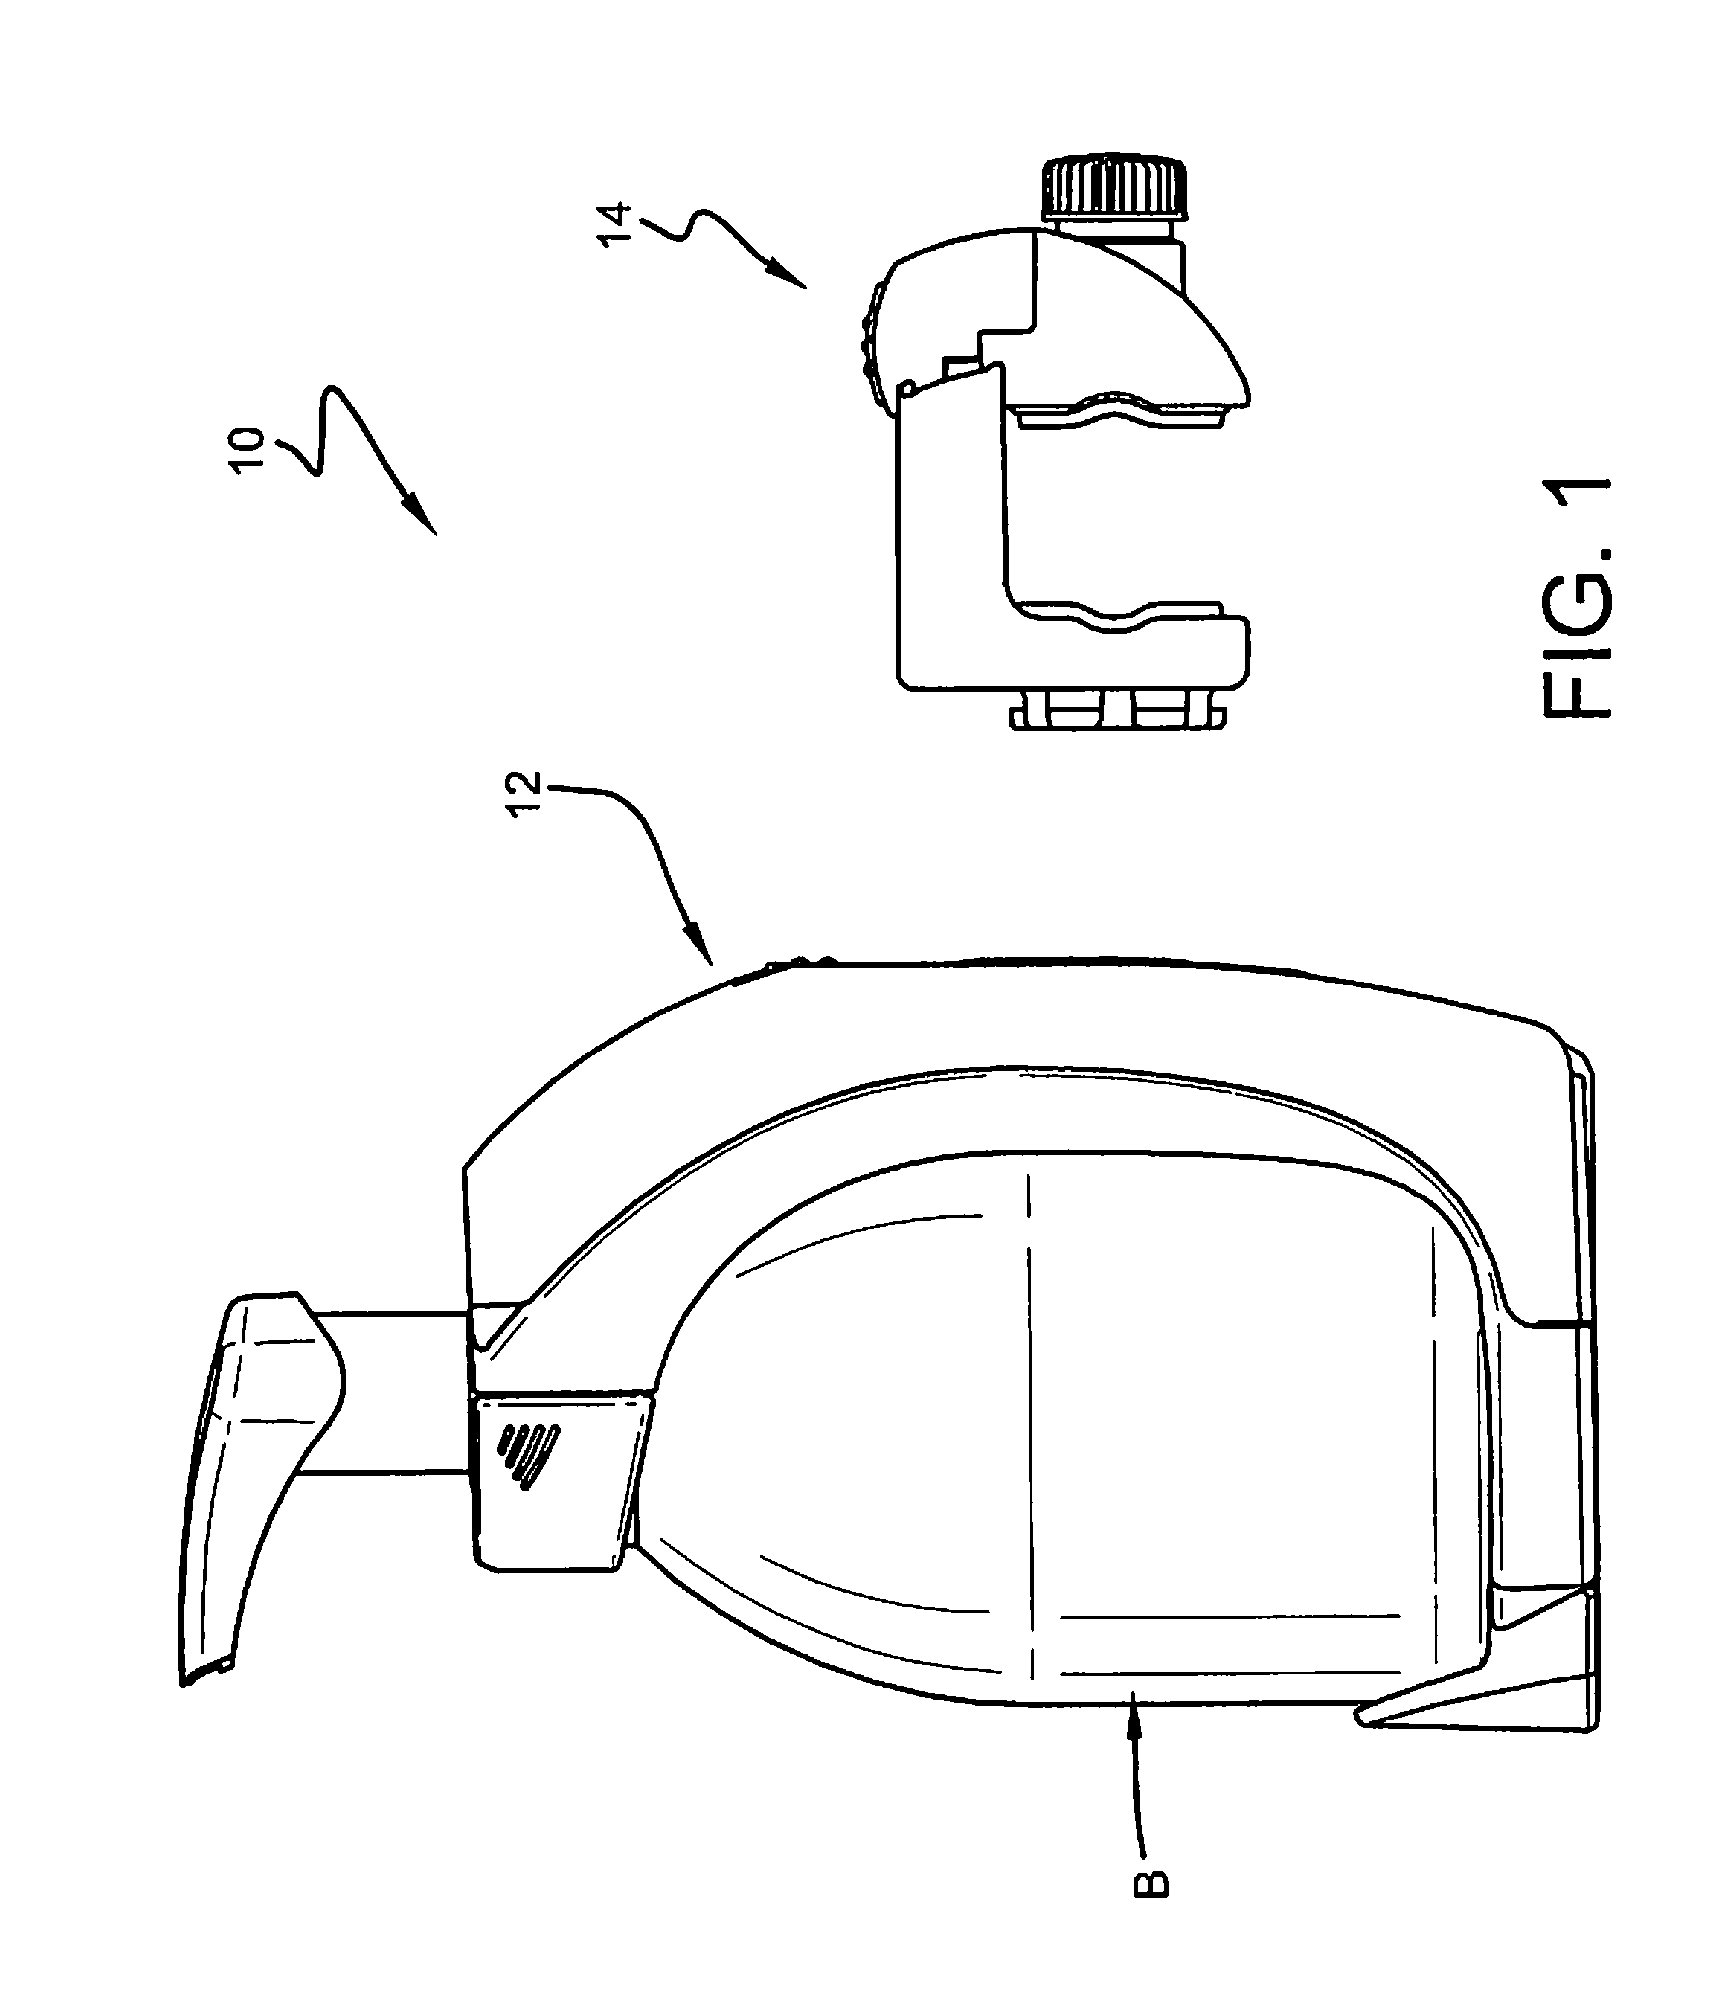 Bottle mounting system including separable bottle and clamp